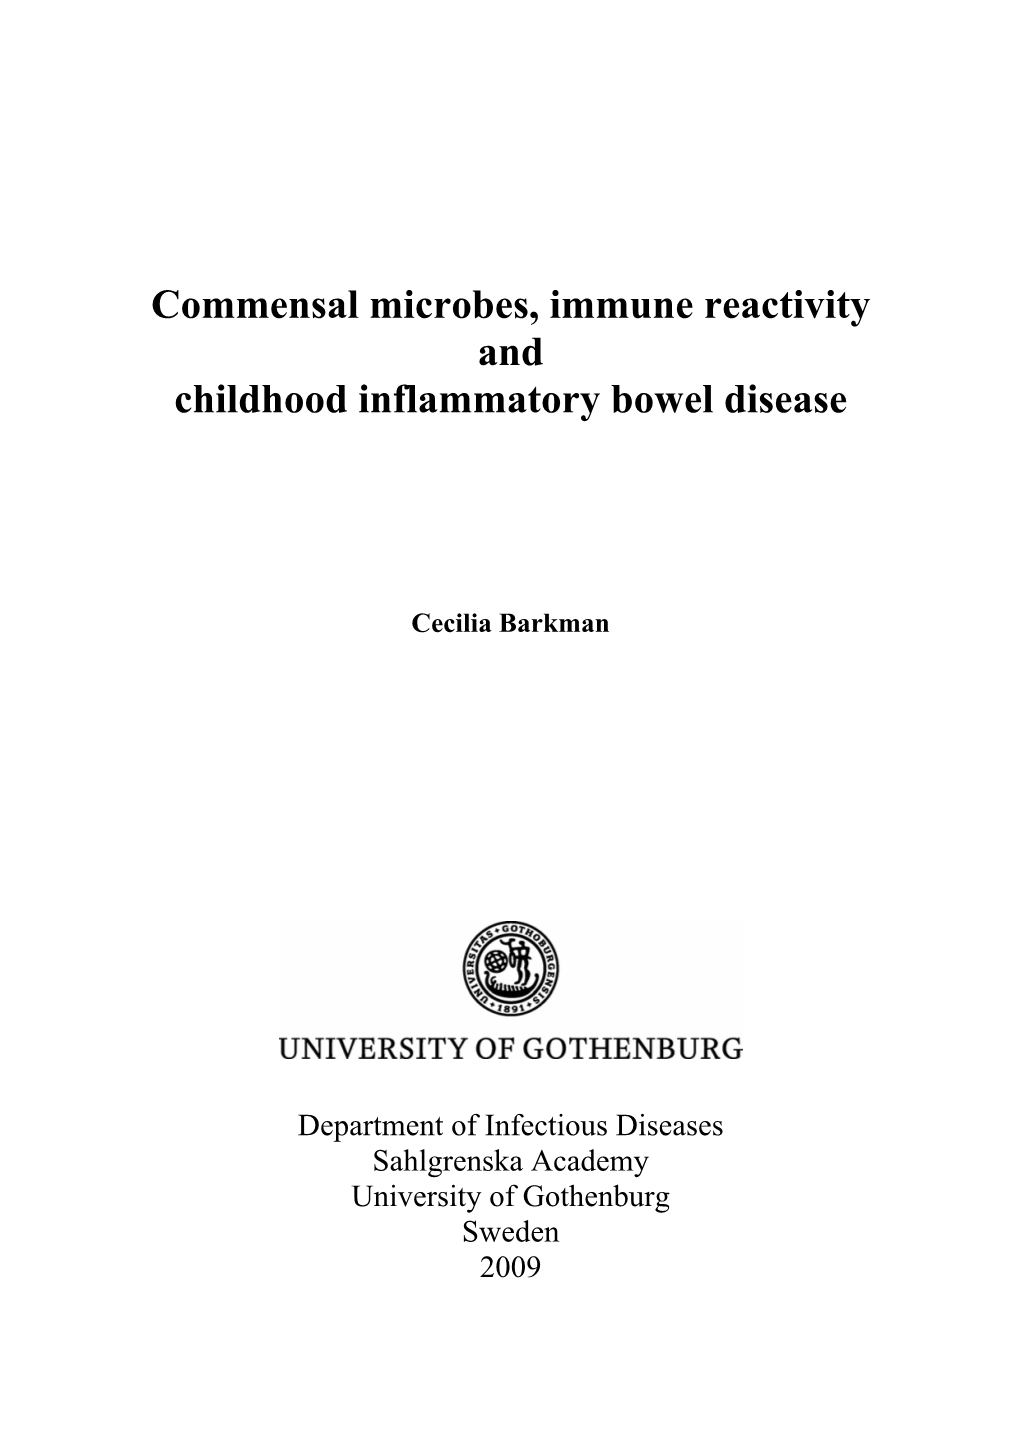 Commensal Microbes, Immune Reactivity and Childhood Inflammatory Bowel Disease